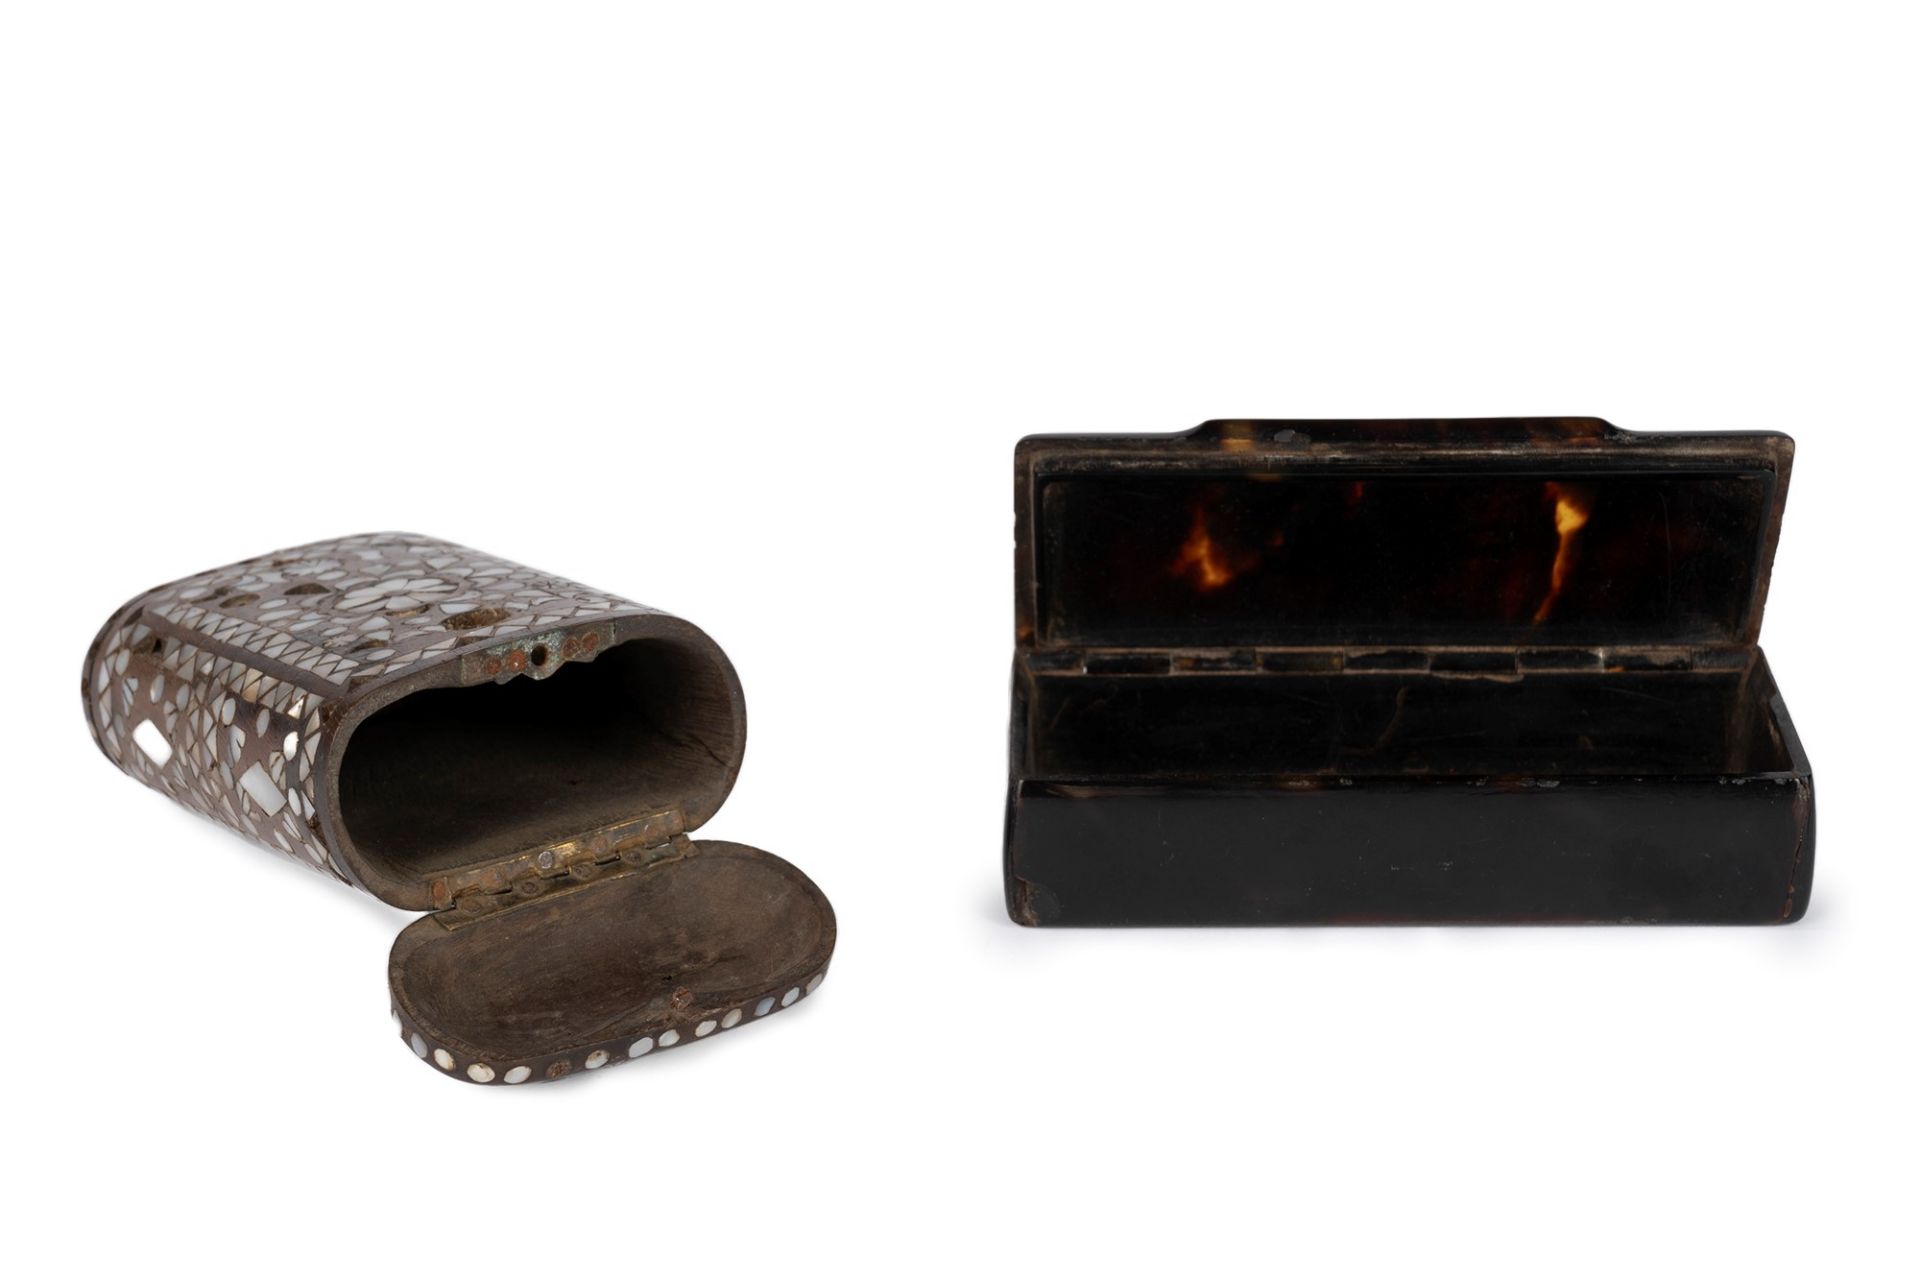 Lot consisting of a small wooden and mother-of-pearl box and another black one, 19th century - Image 3 of 8